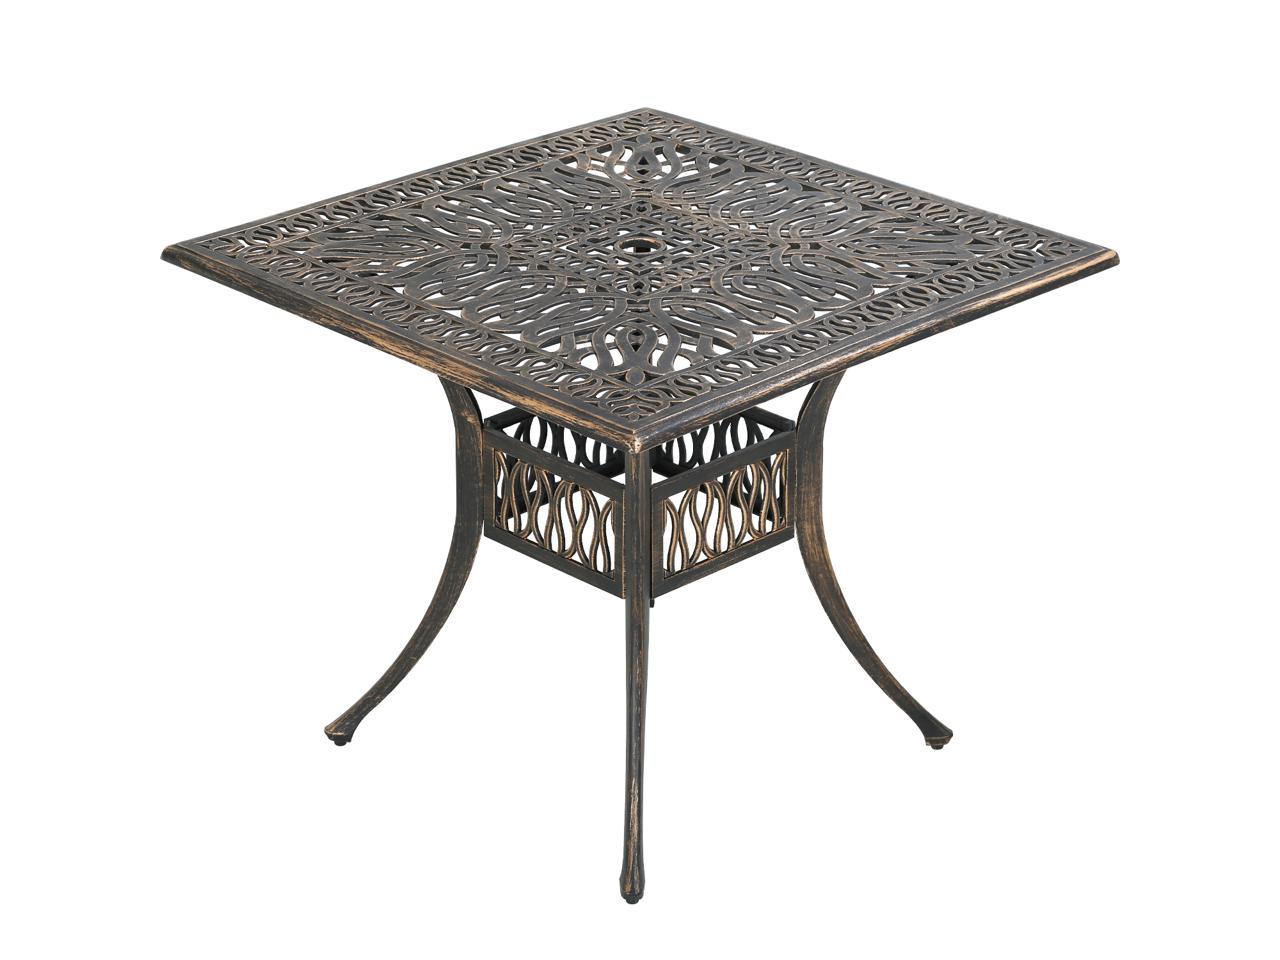 Details about   Patio Dining Table Outdoor Dining Table Wrought Iron Patio Furniture Patio 